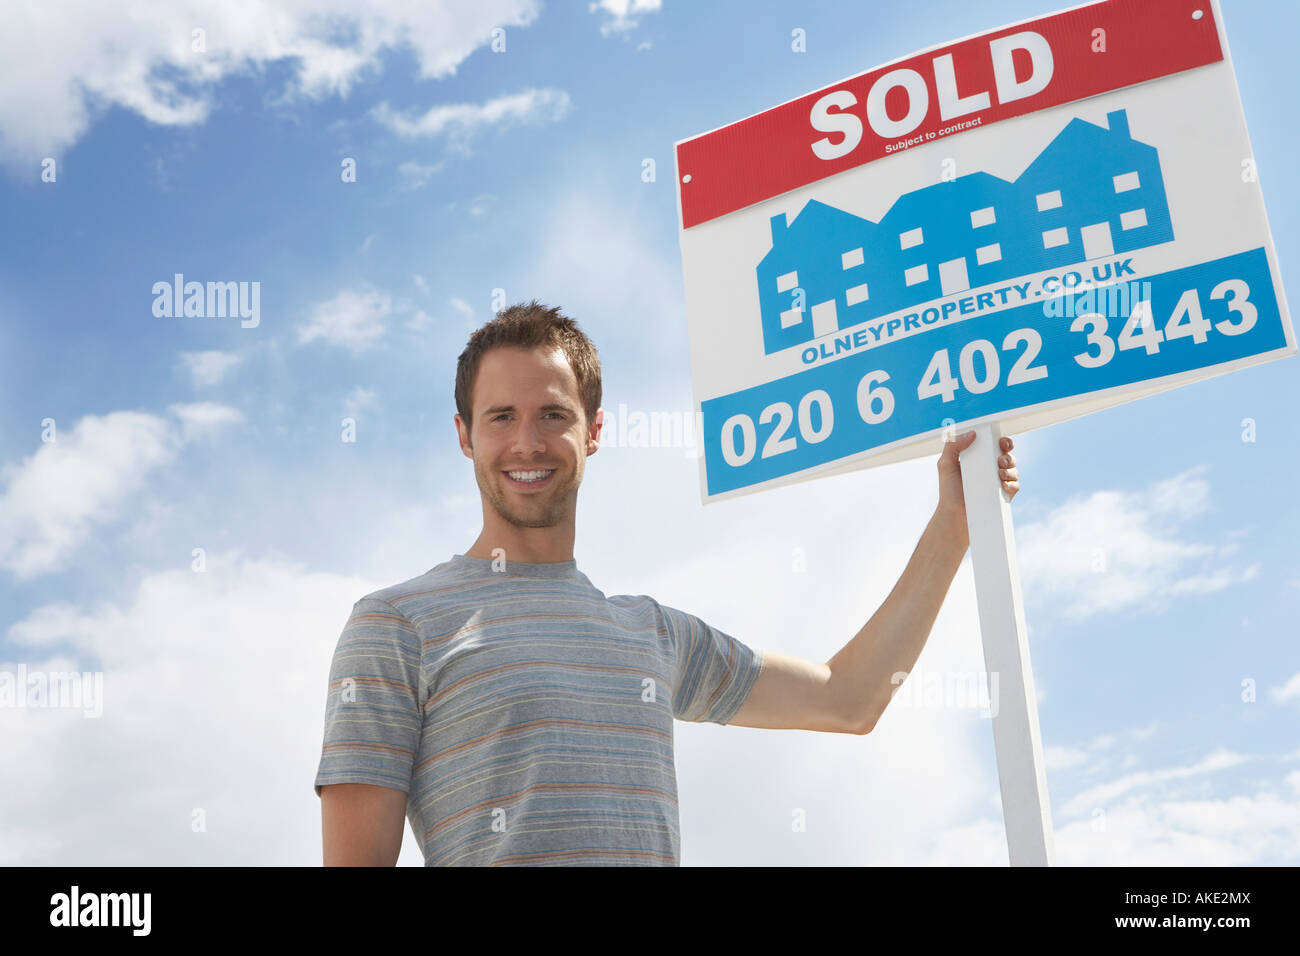 Man holding sold sign, against sky Stock Photo